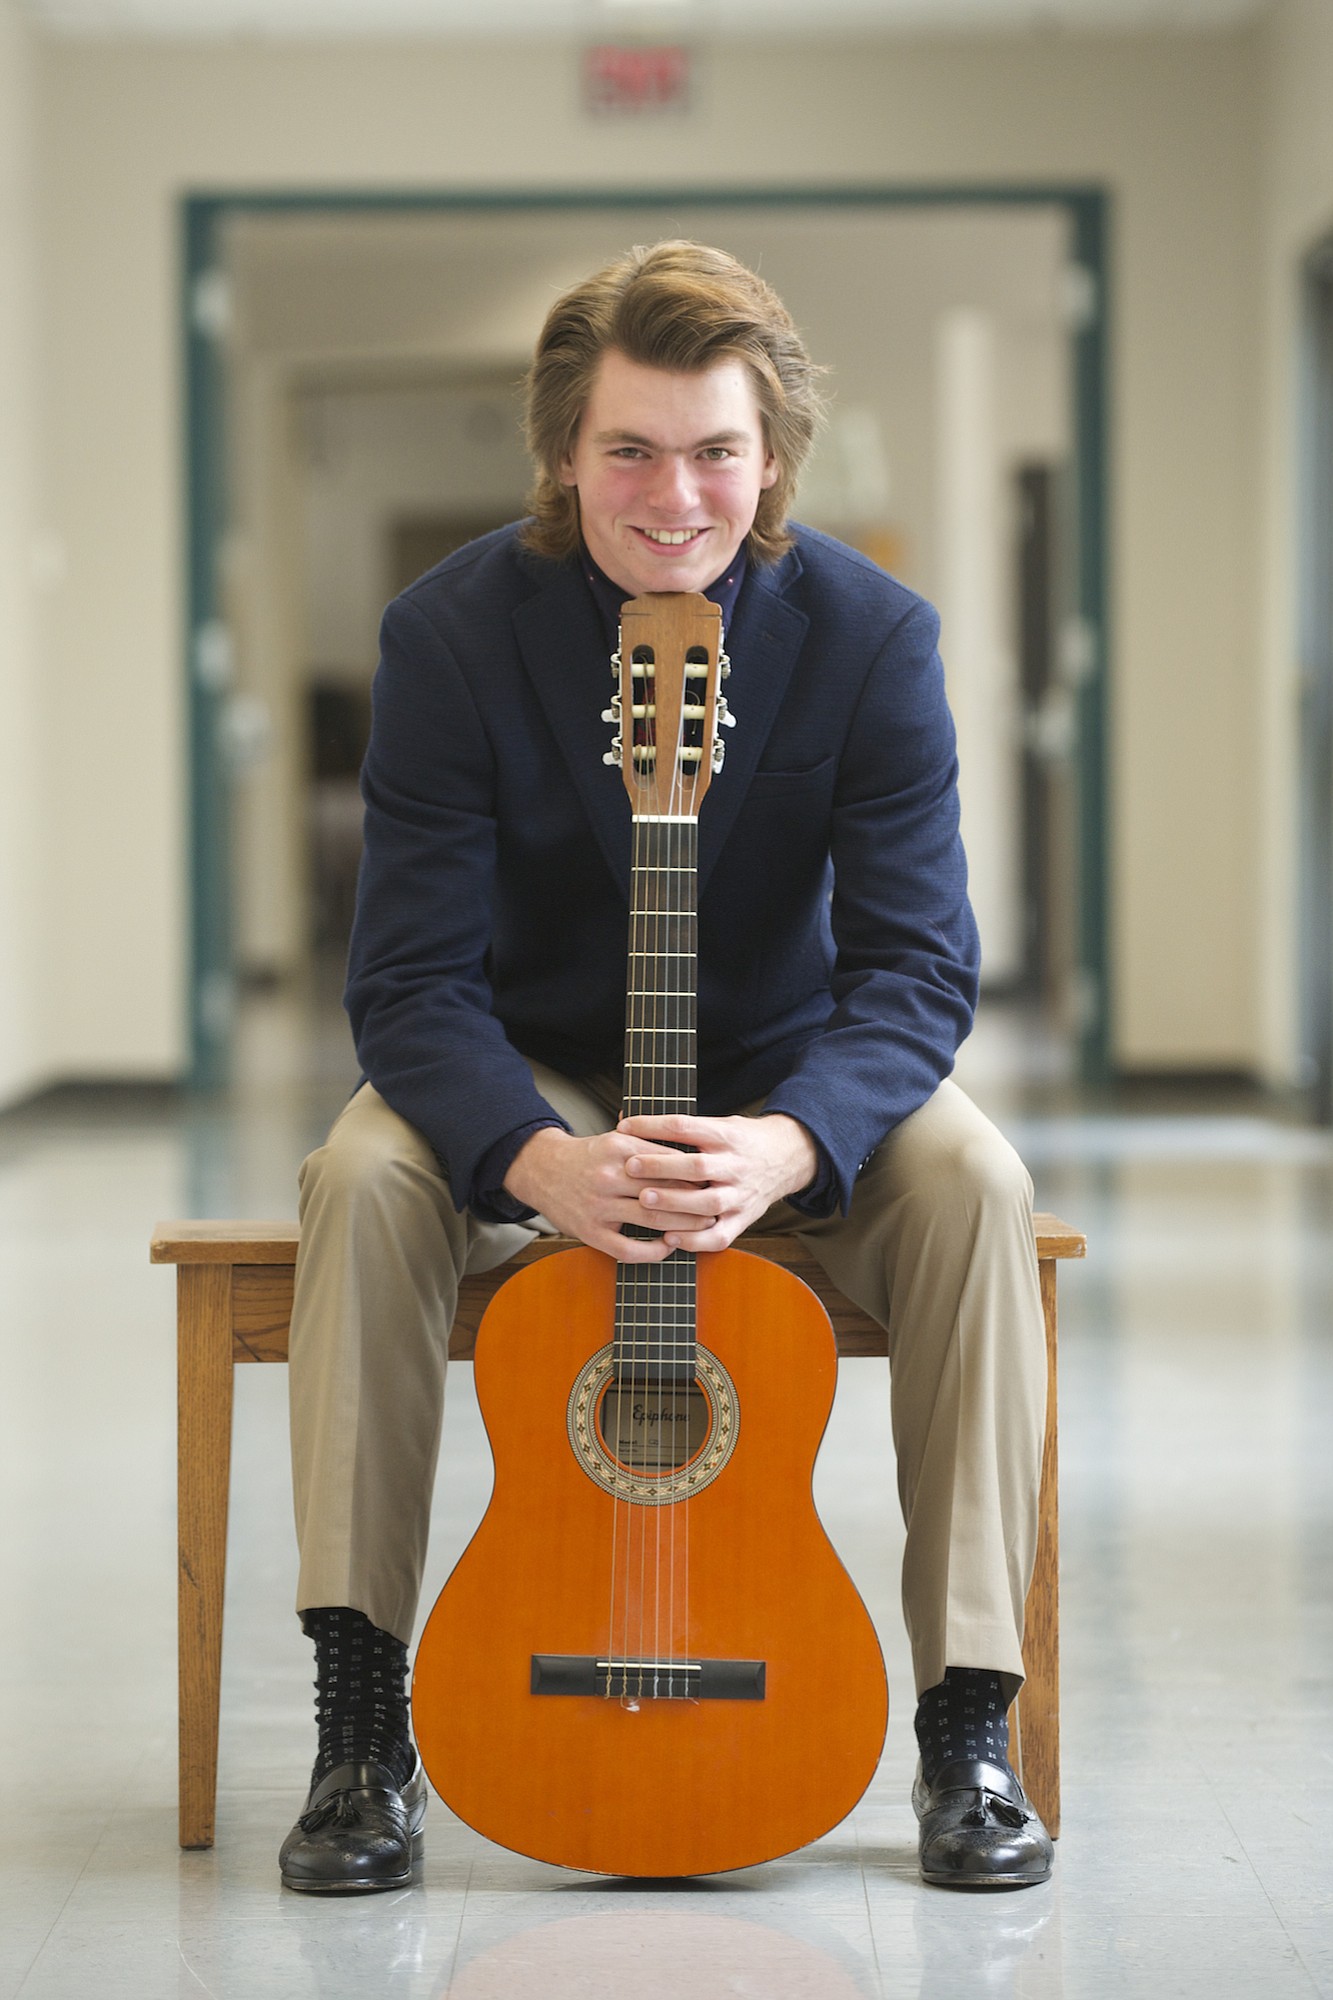 Blake Johnston from La Center High School is a stellar student and musician.